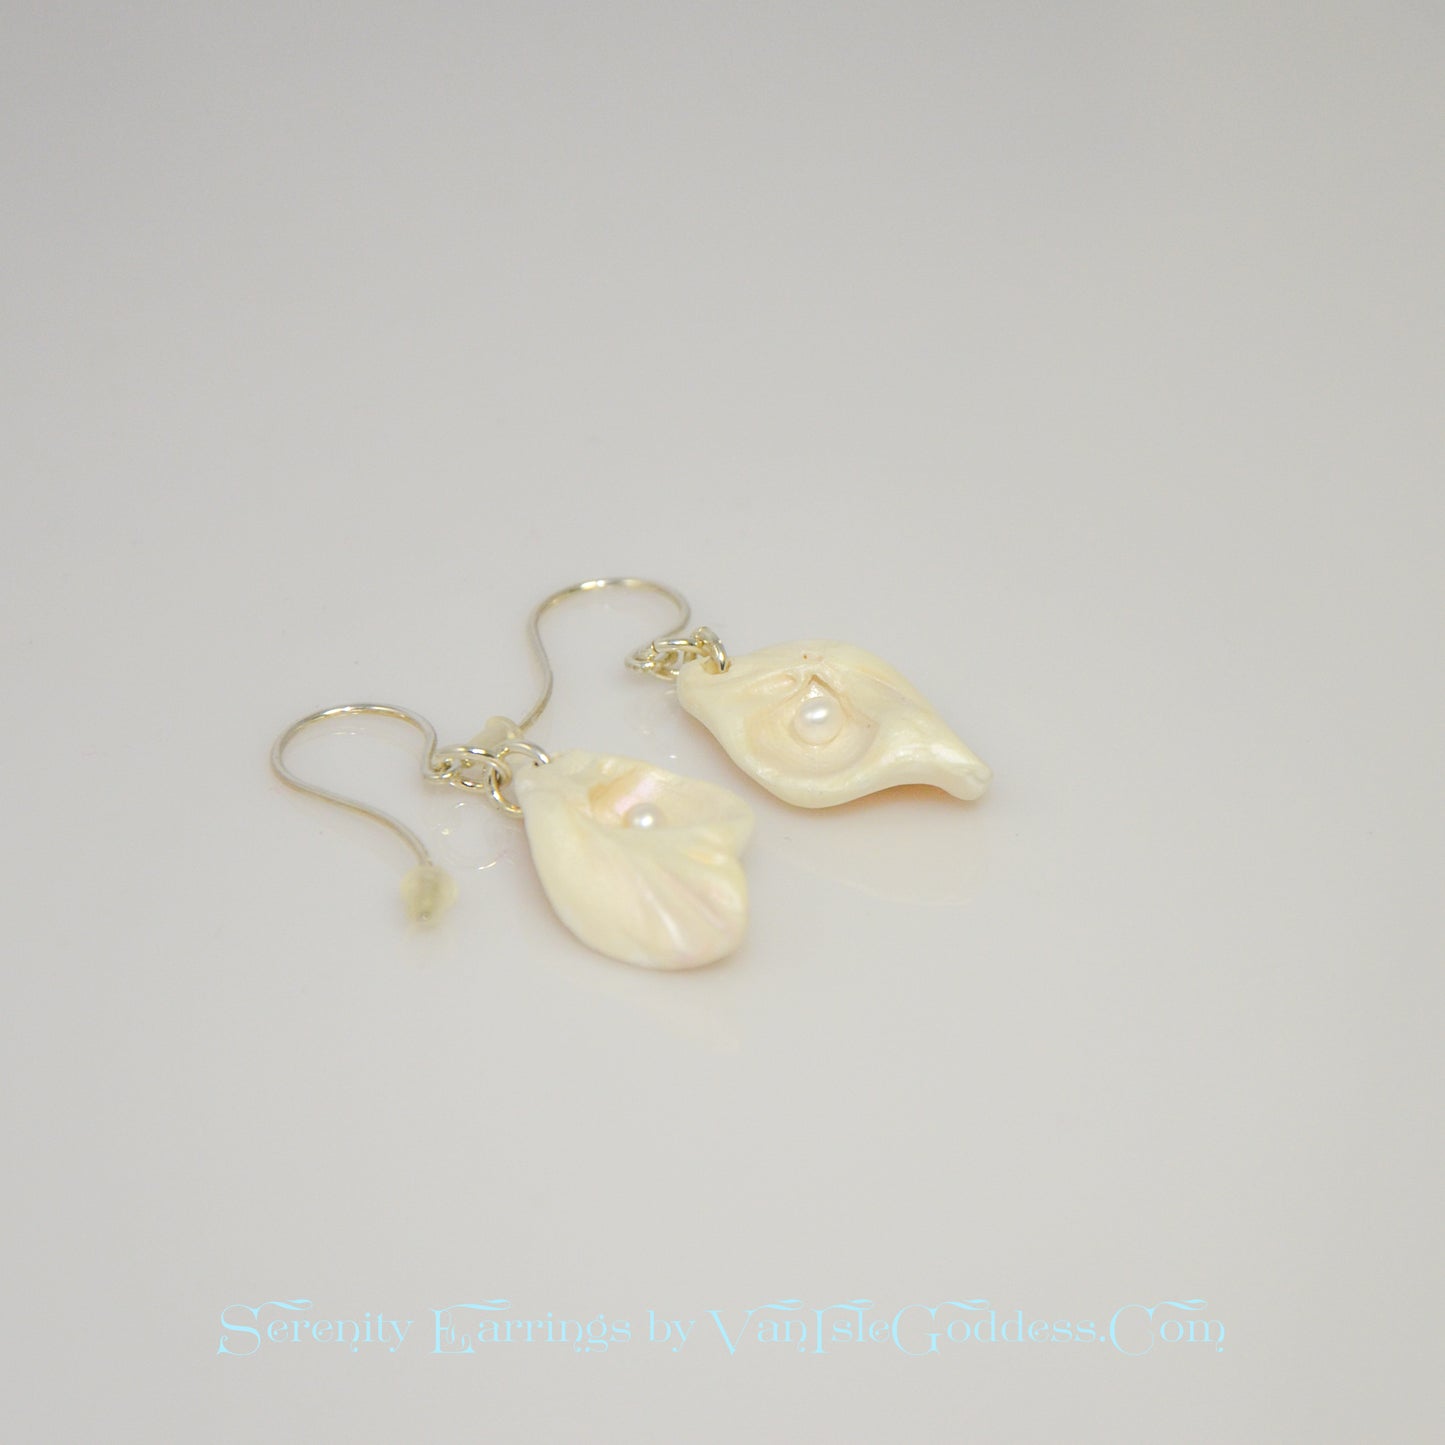 Serenity natural seashell earrings with real baby freshwater pearls.